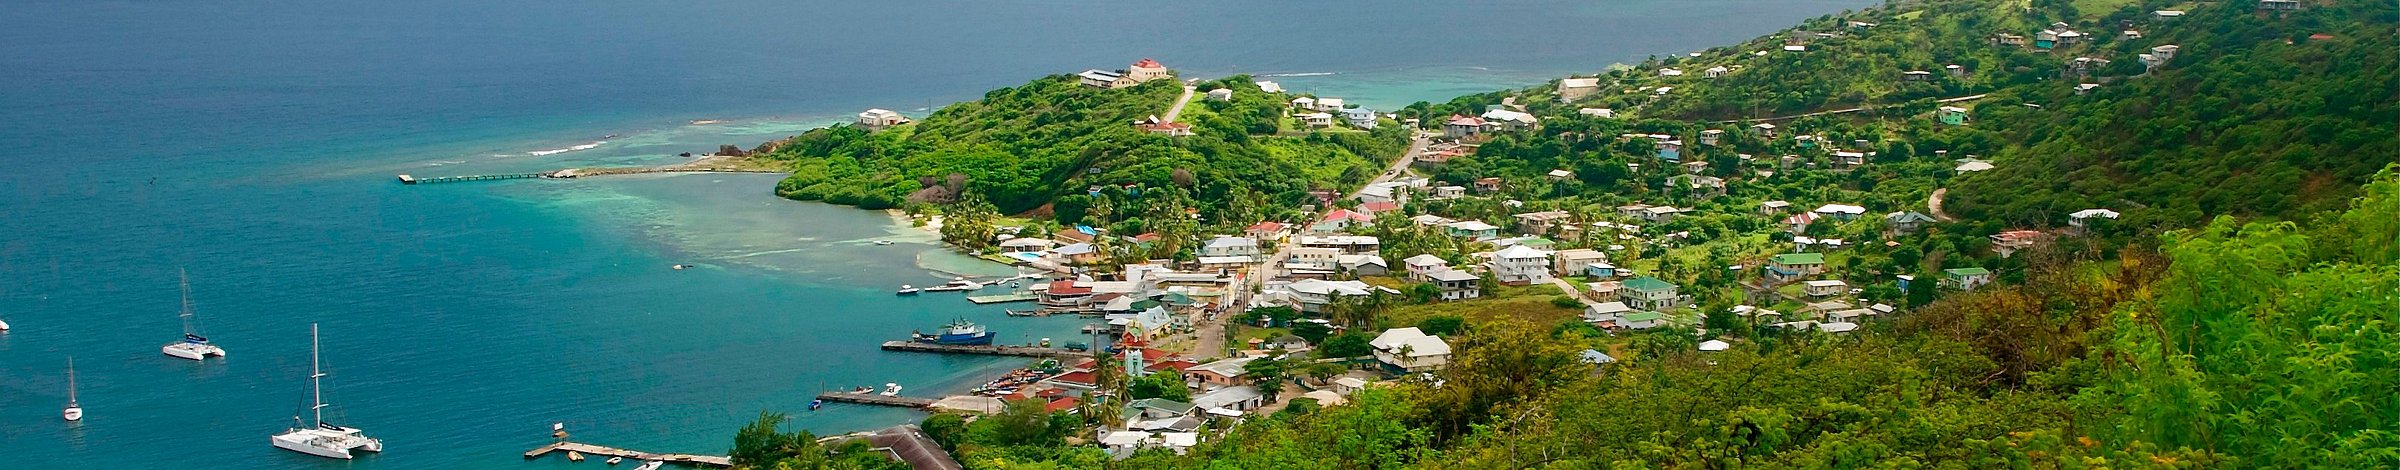 THE BEST Hotels With Babysitting in St. Vincent and the Grenadines ...